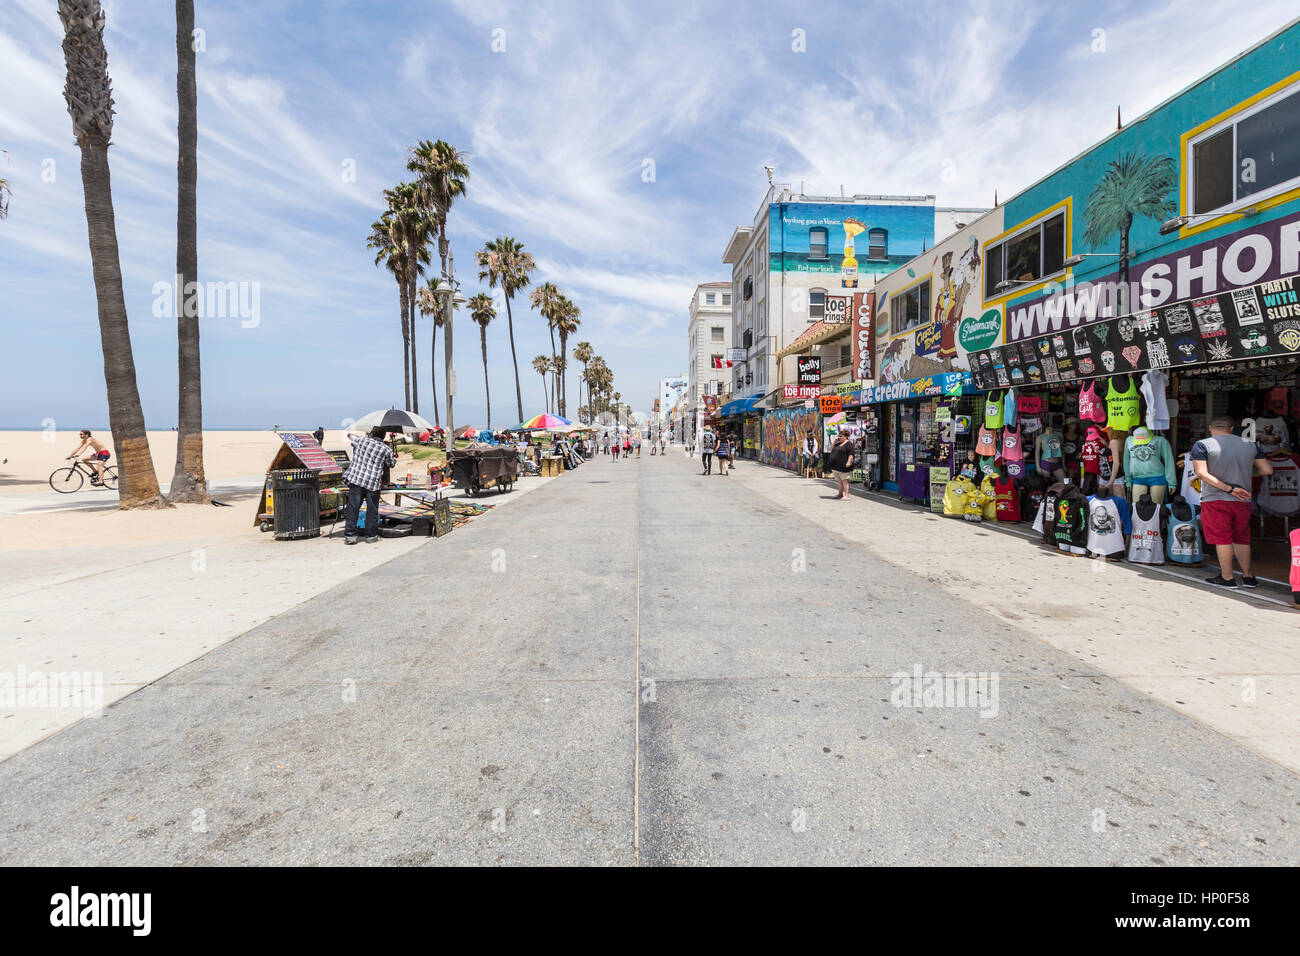 Los Angeles, California, USA - June 20, 2014:  Editorial photo of famously funky Venice Beach board walk in Los Angeles. Stock Photo